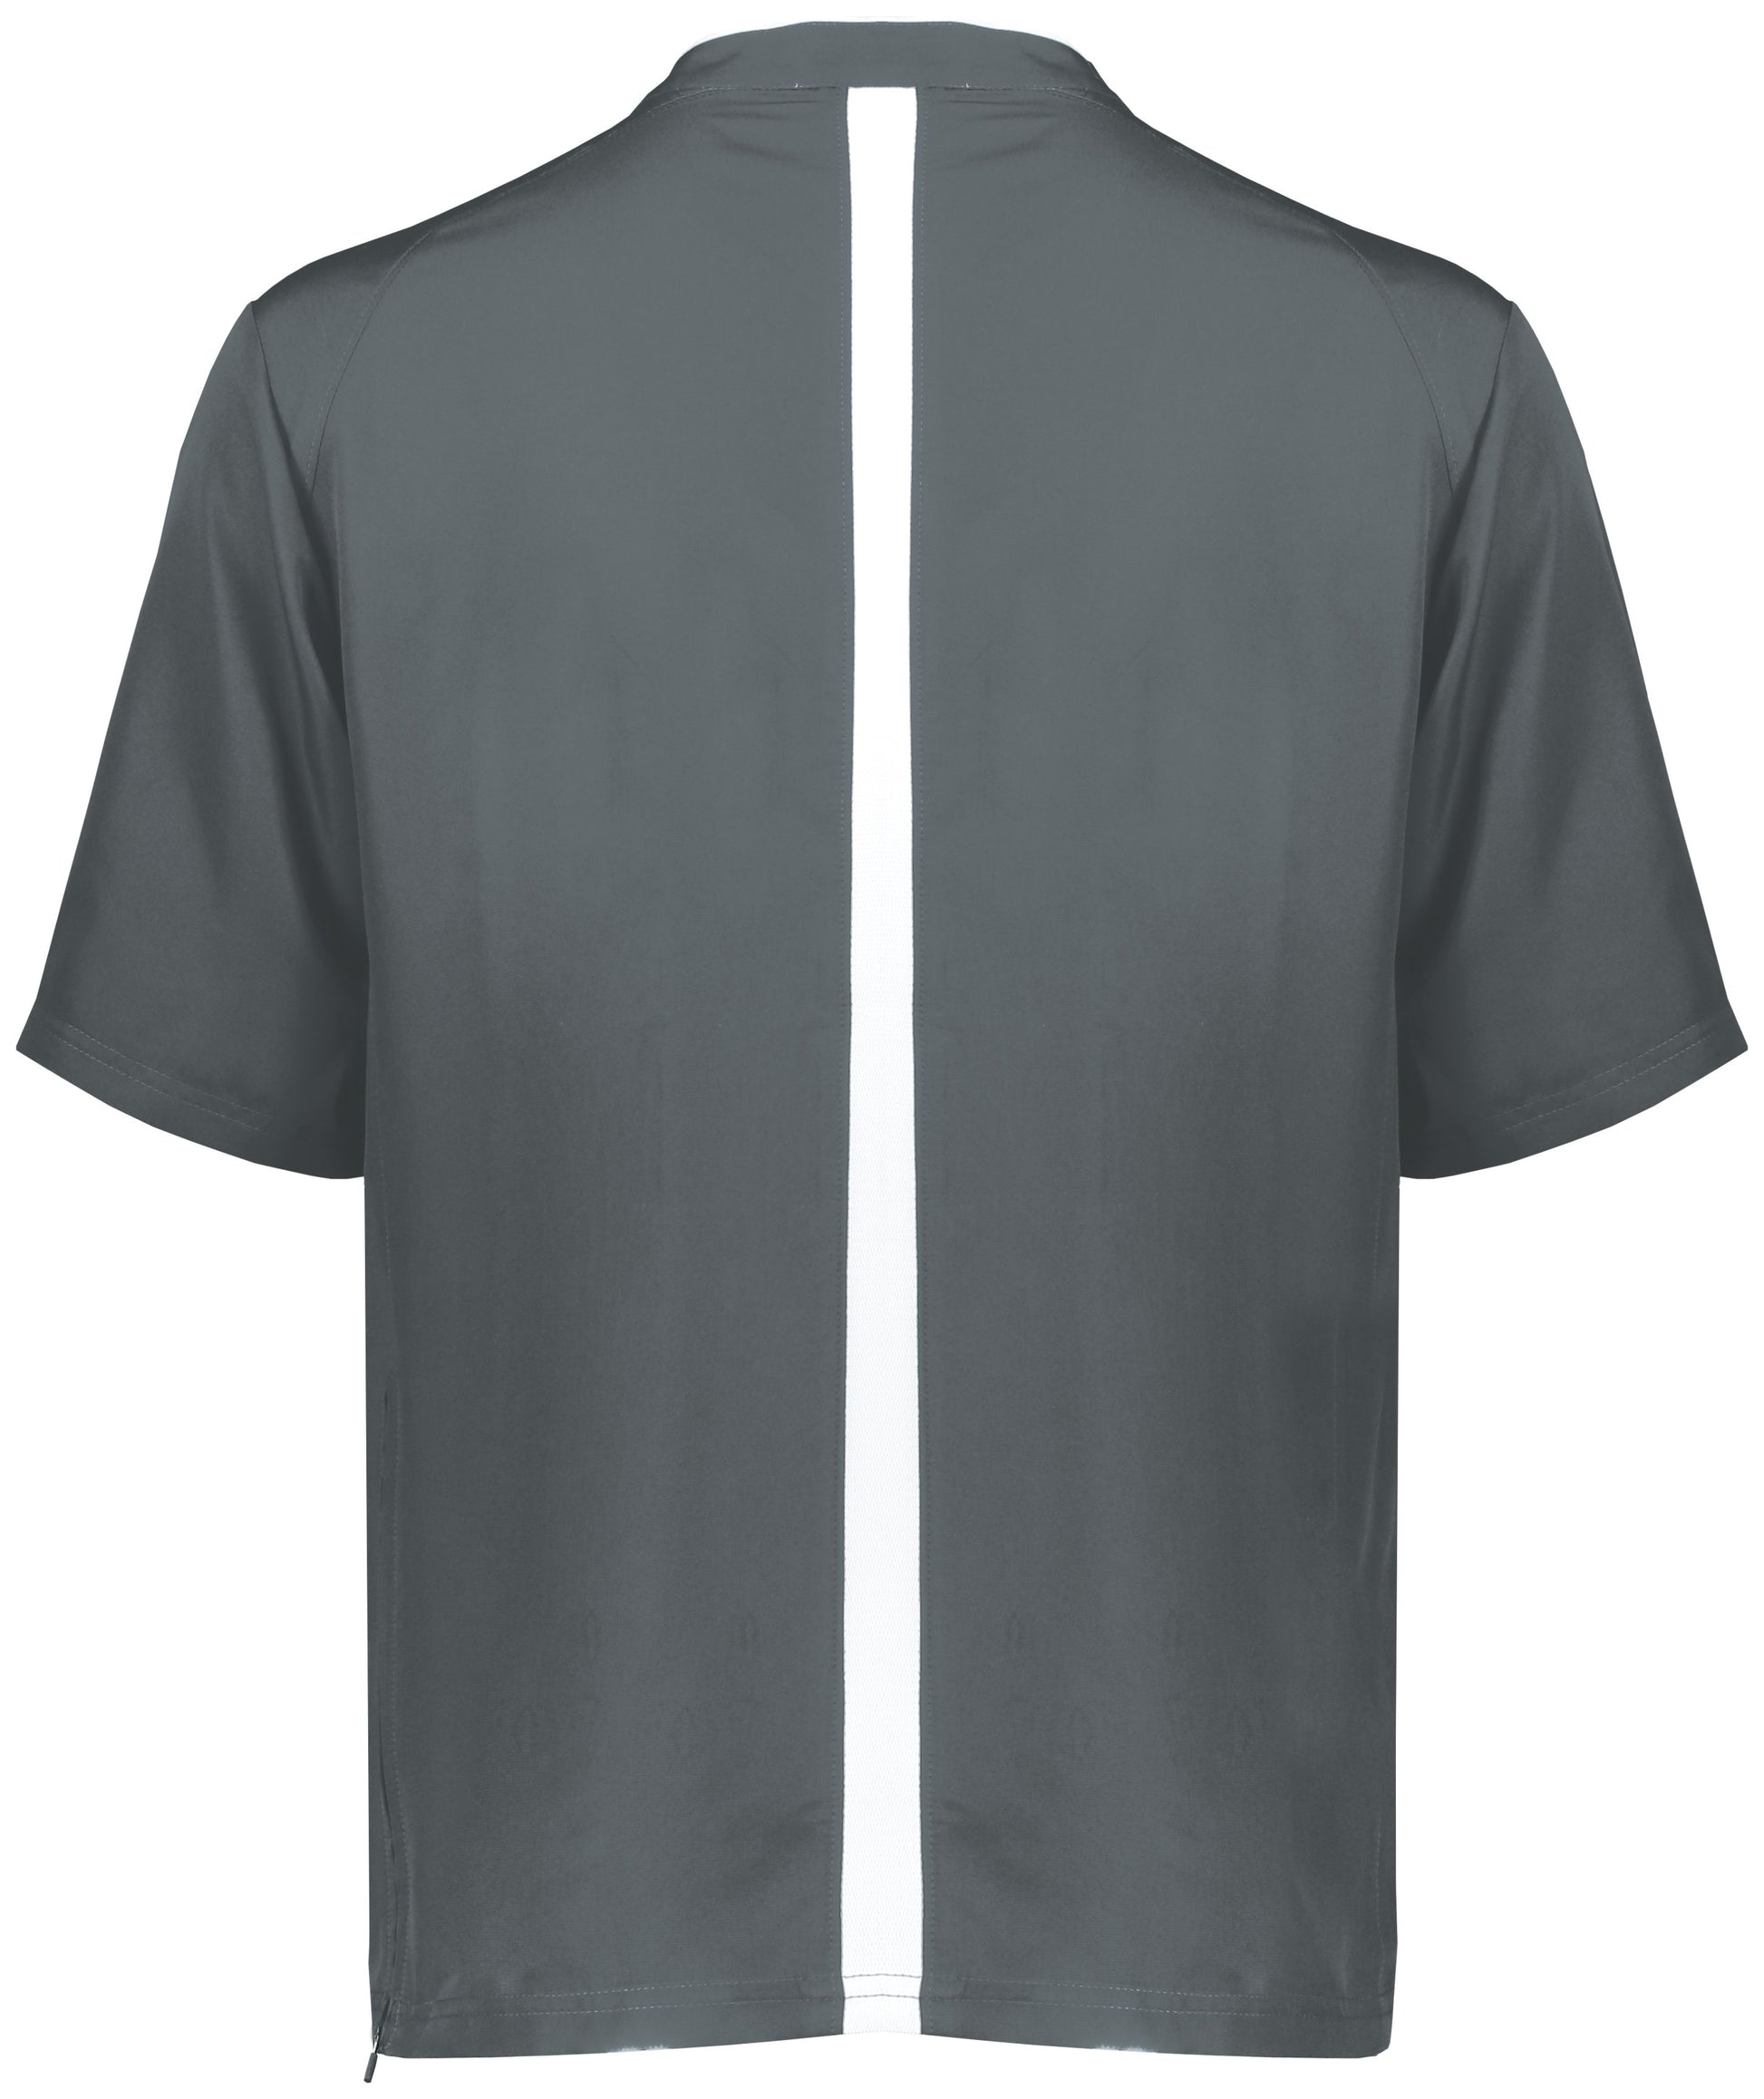 John Hancock - Clubhouse Short Sleeve Pullover Cage Jacket - Graphite (229581/229681) - Southern Grace Creations